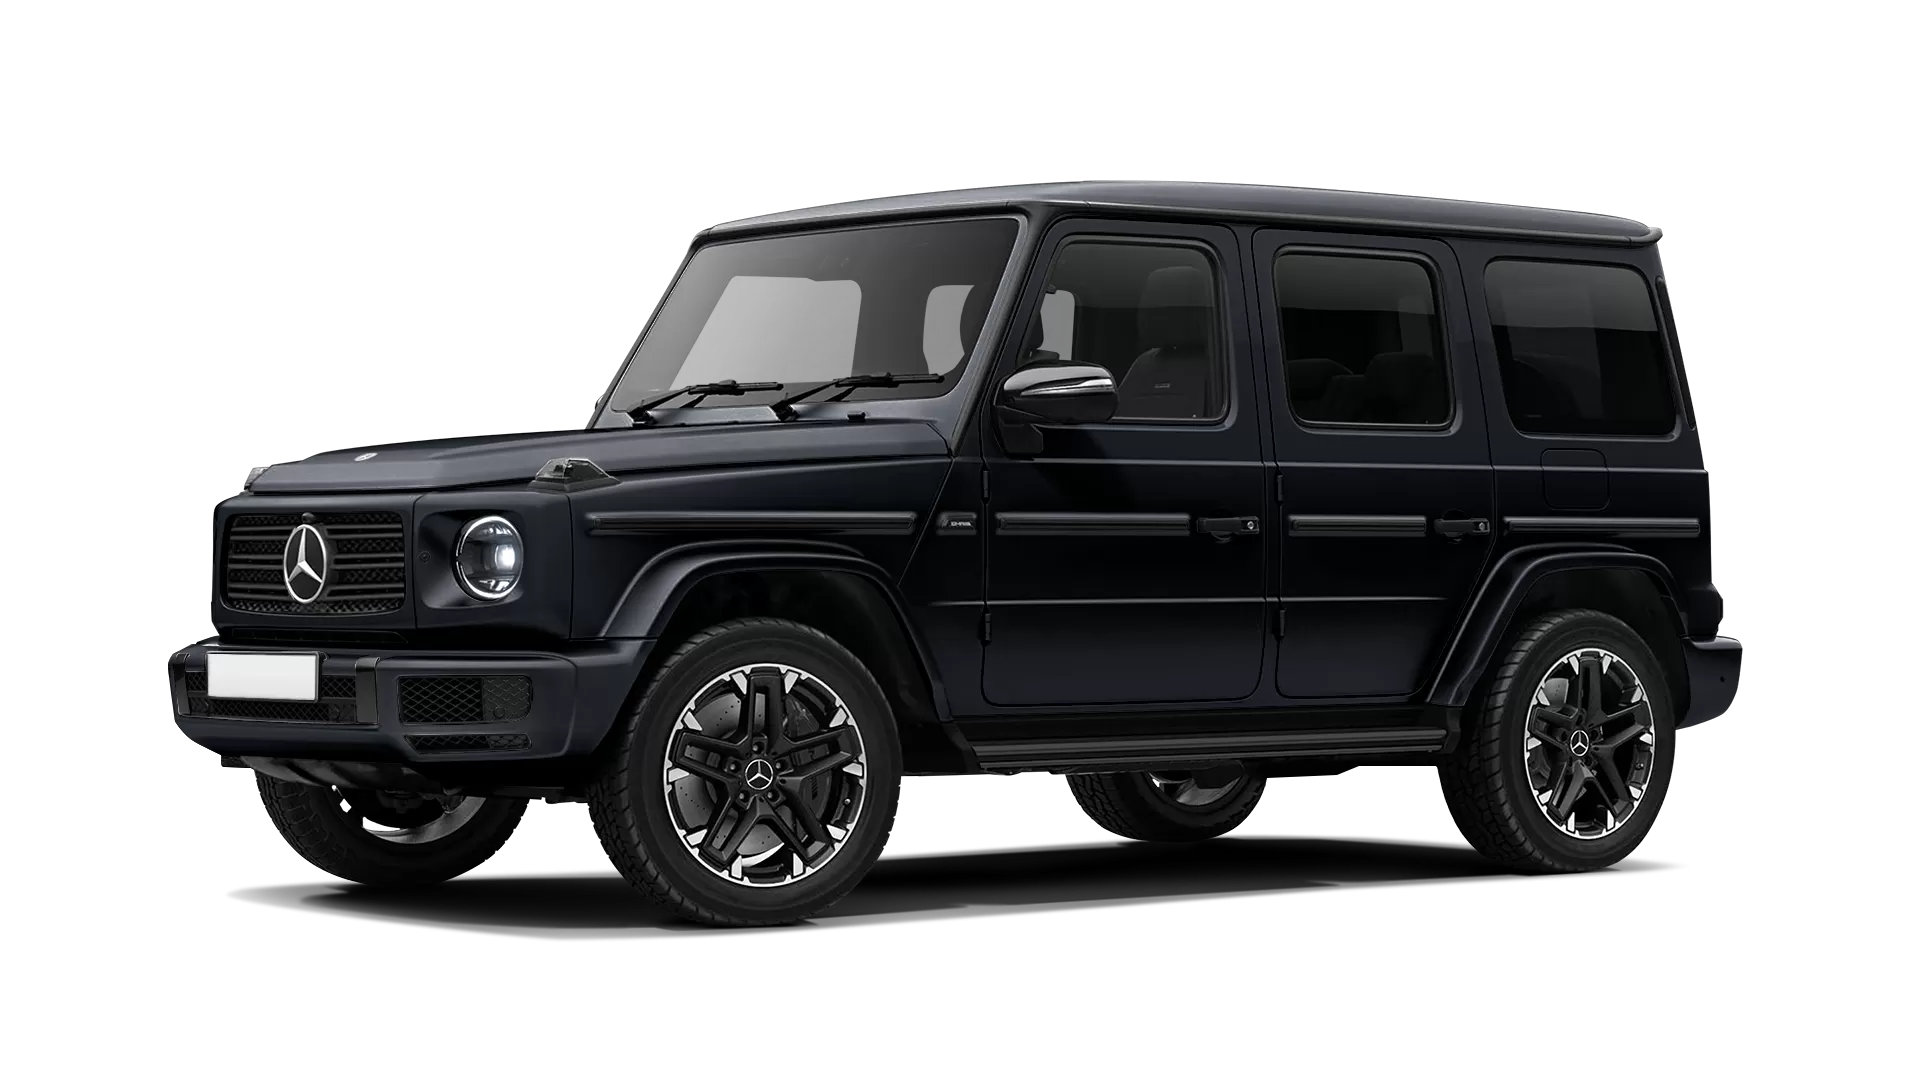 Mercedes G class W463 stock front view in Night Black color